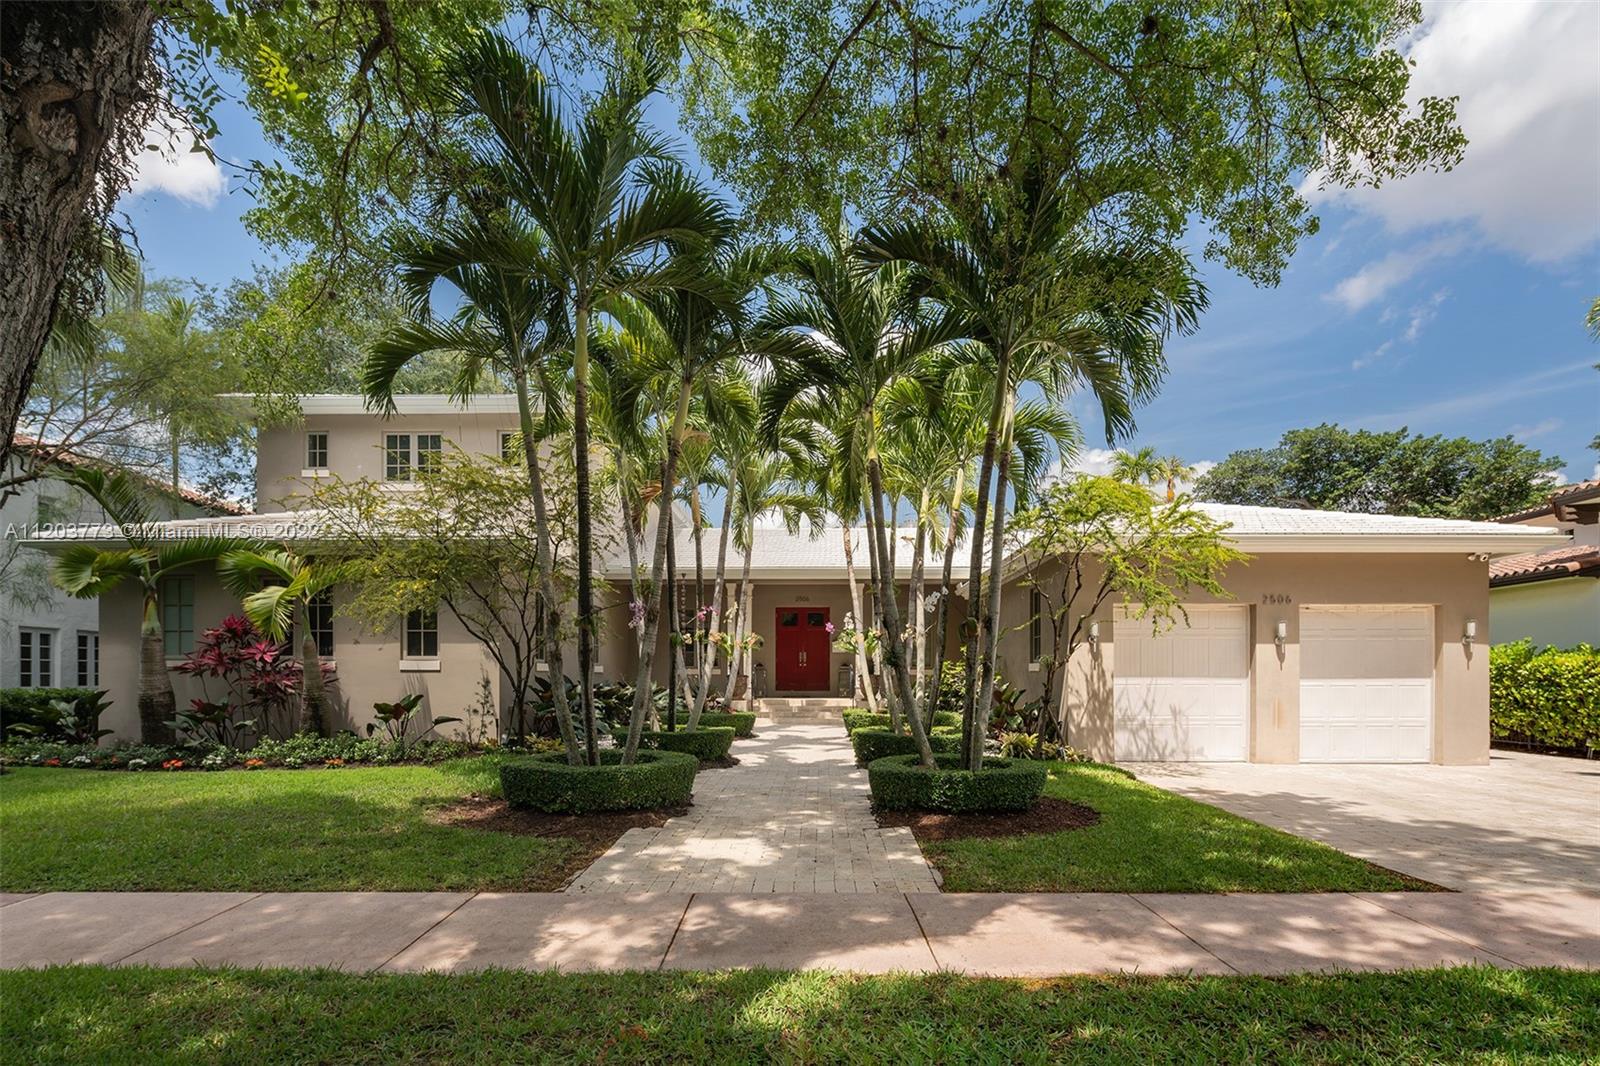 This extraordinary residence set on a rare 17,500 square foot lot is centrally located in the beautiful historic Coral Gables Area, just minutes from Miracle Mile. The keystone lined entry way leads to a six bed and five bath spread over 6,337 SqFt. The home boasts an open floor plan with a large chef’s kitchen fully equipped with Subzero/Wolf appliances, a 500-bottle temperature-controlled wine cellar, covered summer kitchen and dining area perfect for entertaining guest. The backyard is home to a large pool, half basketball court, and tree lined open space. The full home generator lends peace of mind during hurricane season in this one-of-a-kind residence.